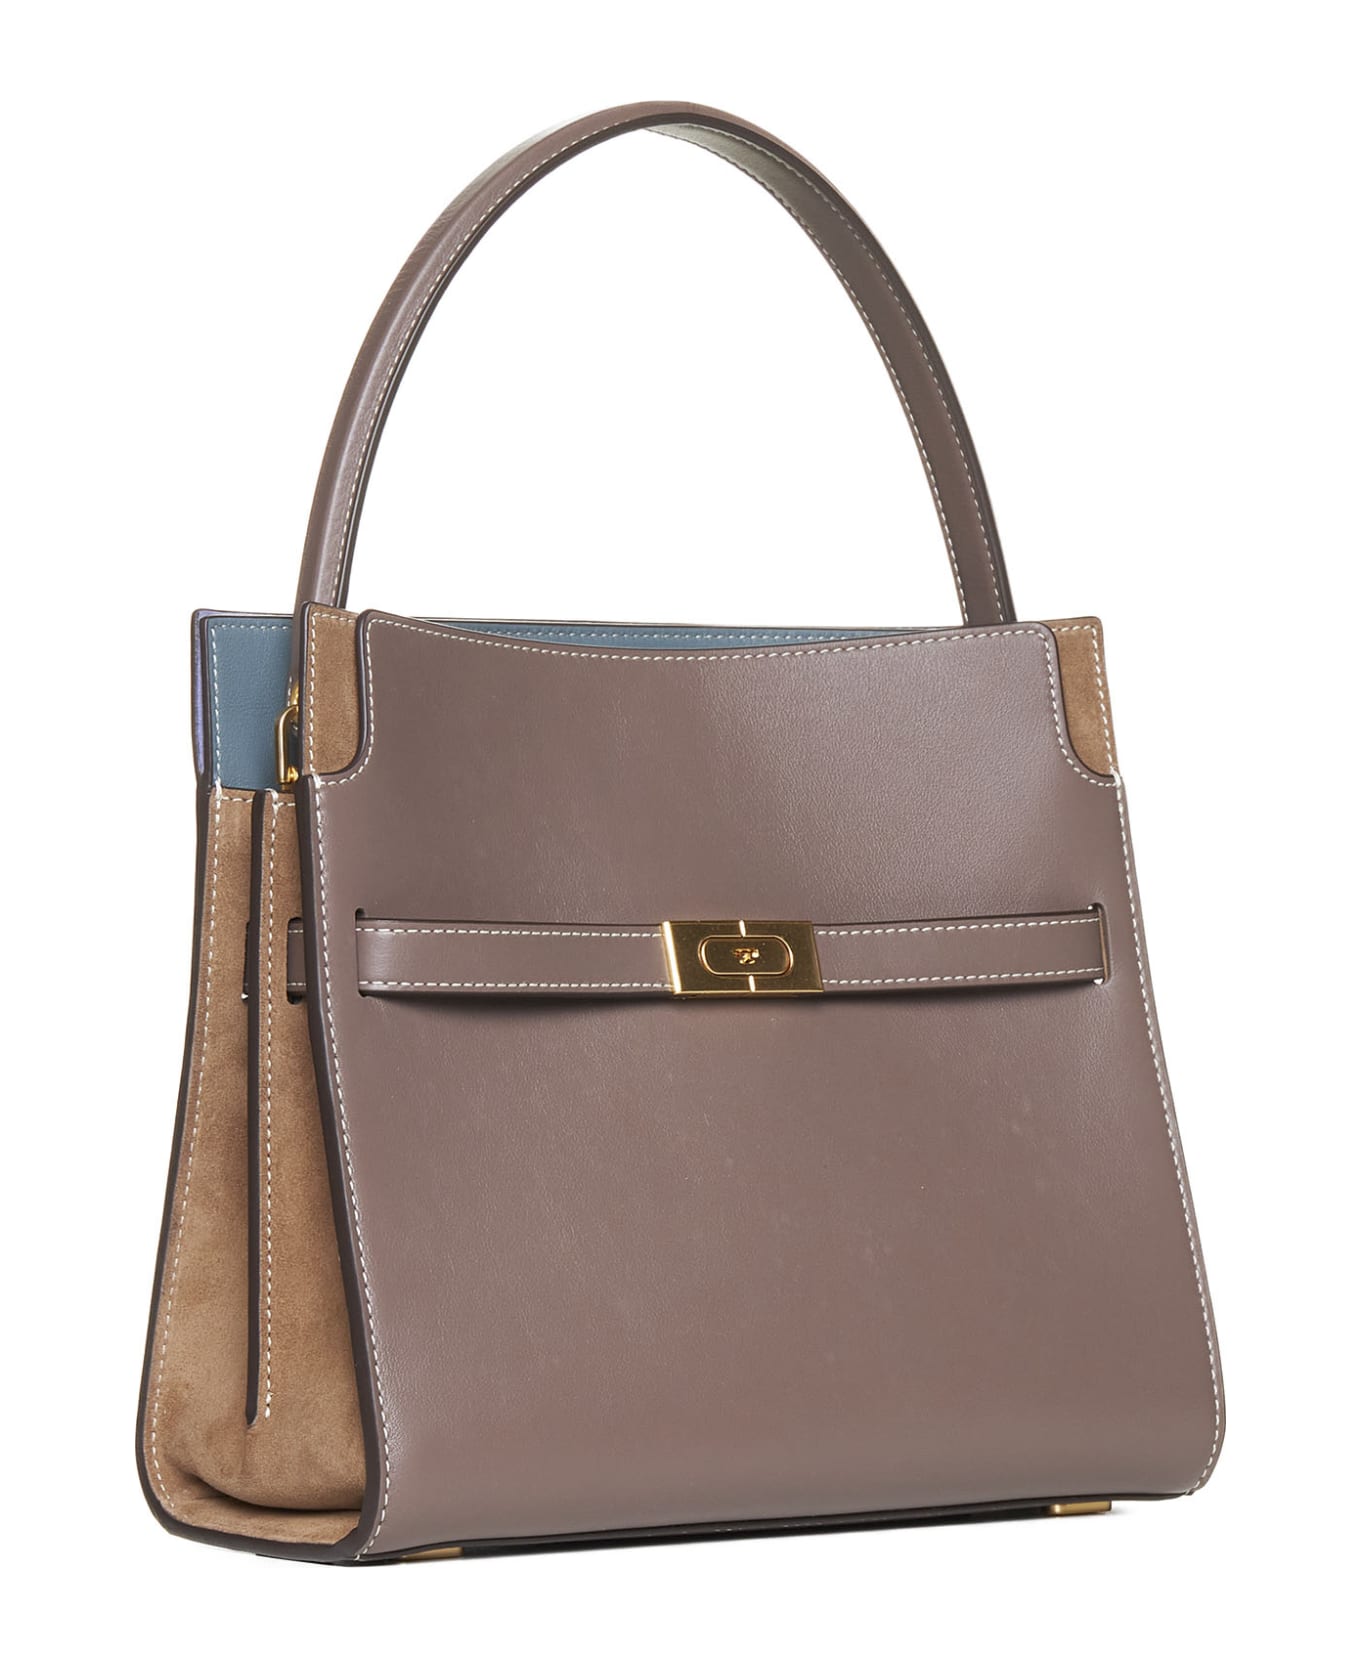 Tory Burch Lee Radziwill Double Small Bag - CLAM SHELL